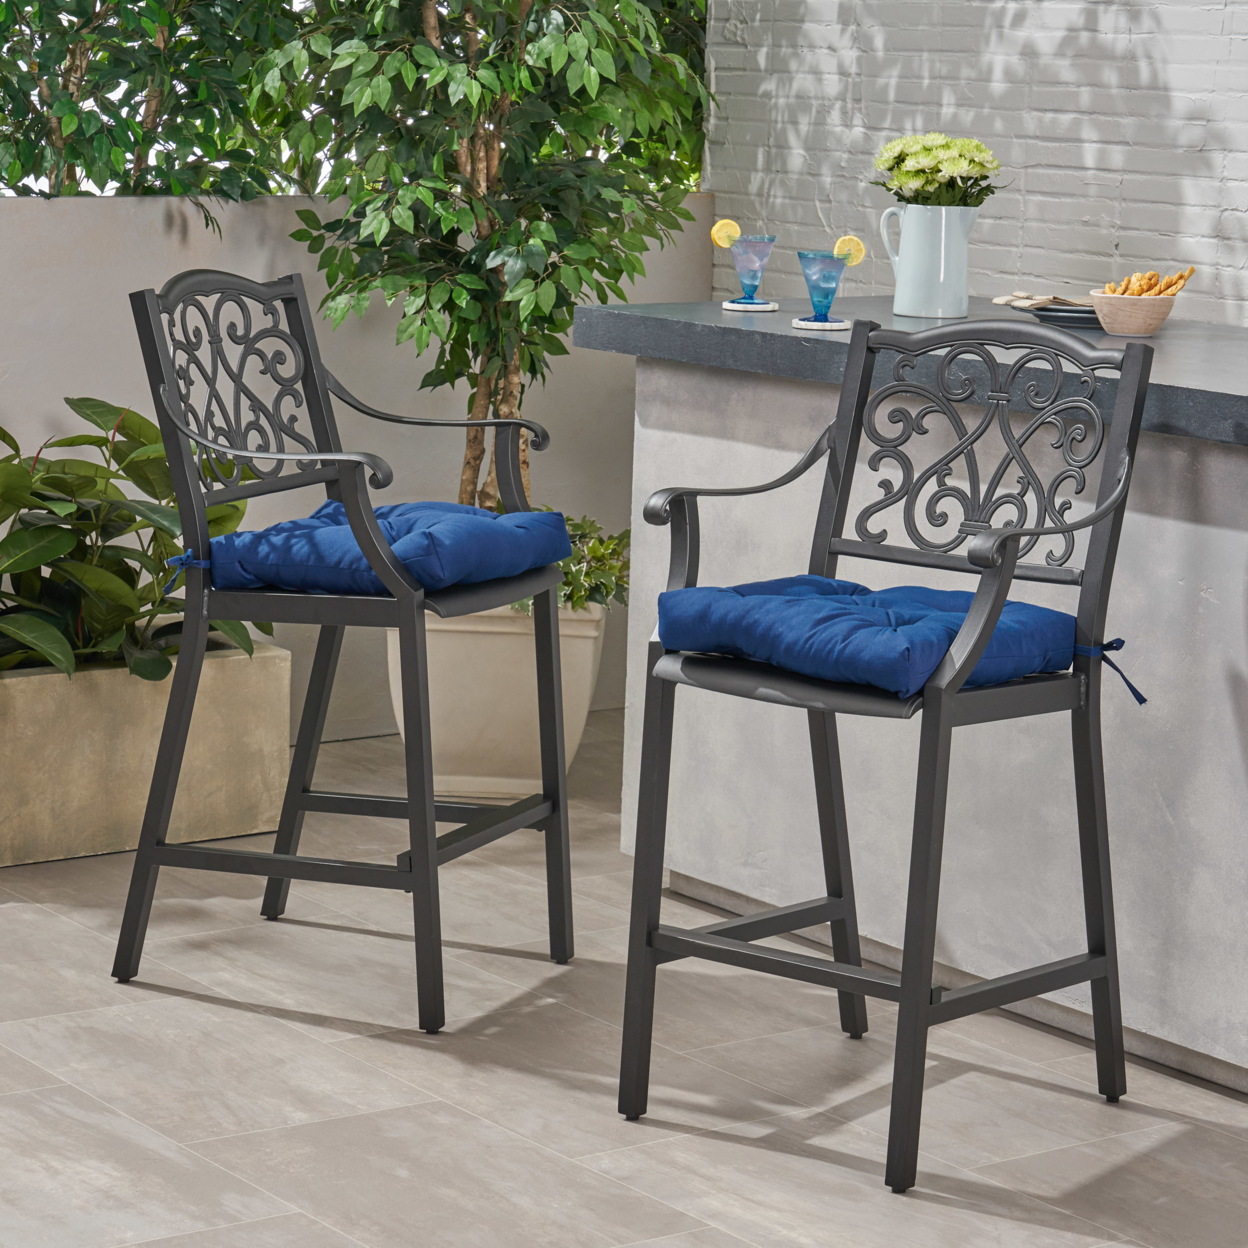 Roberta Outdoor Barstool With Cushion (Set Of 2) Antique Matte Black And Charcoal - Antique Matte Black + Tuscany